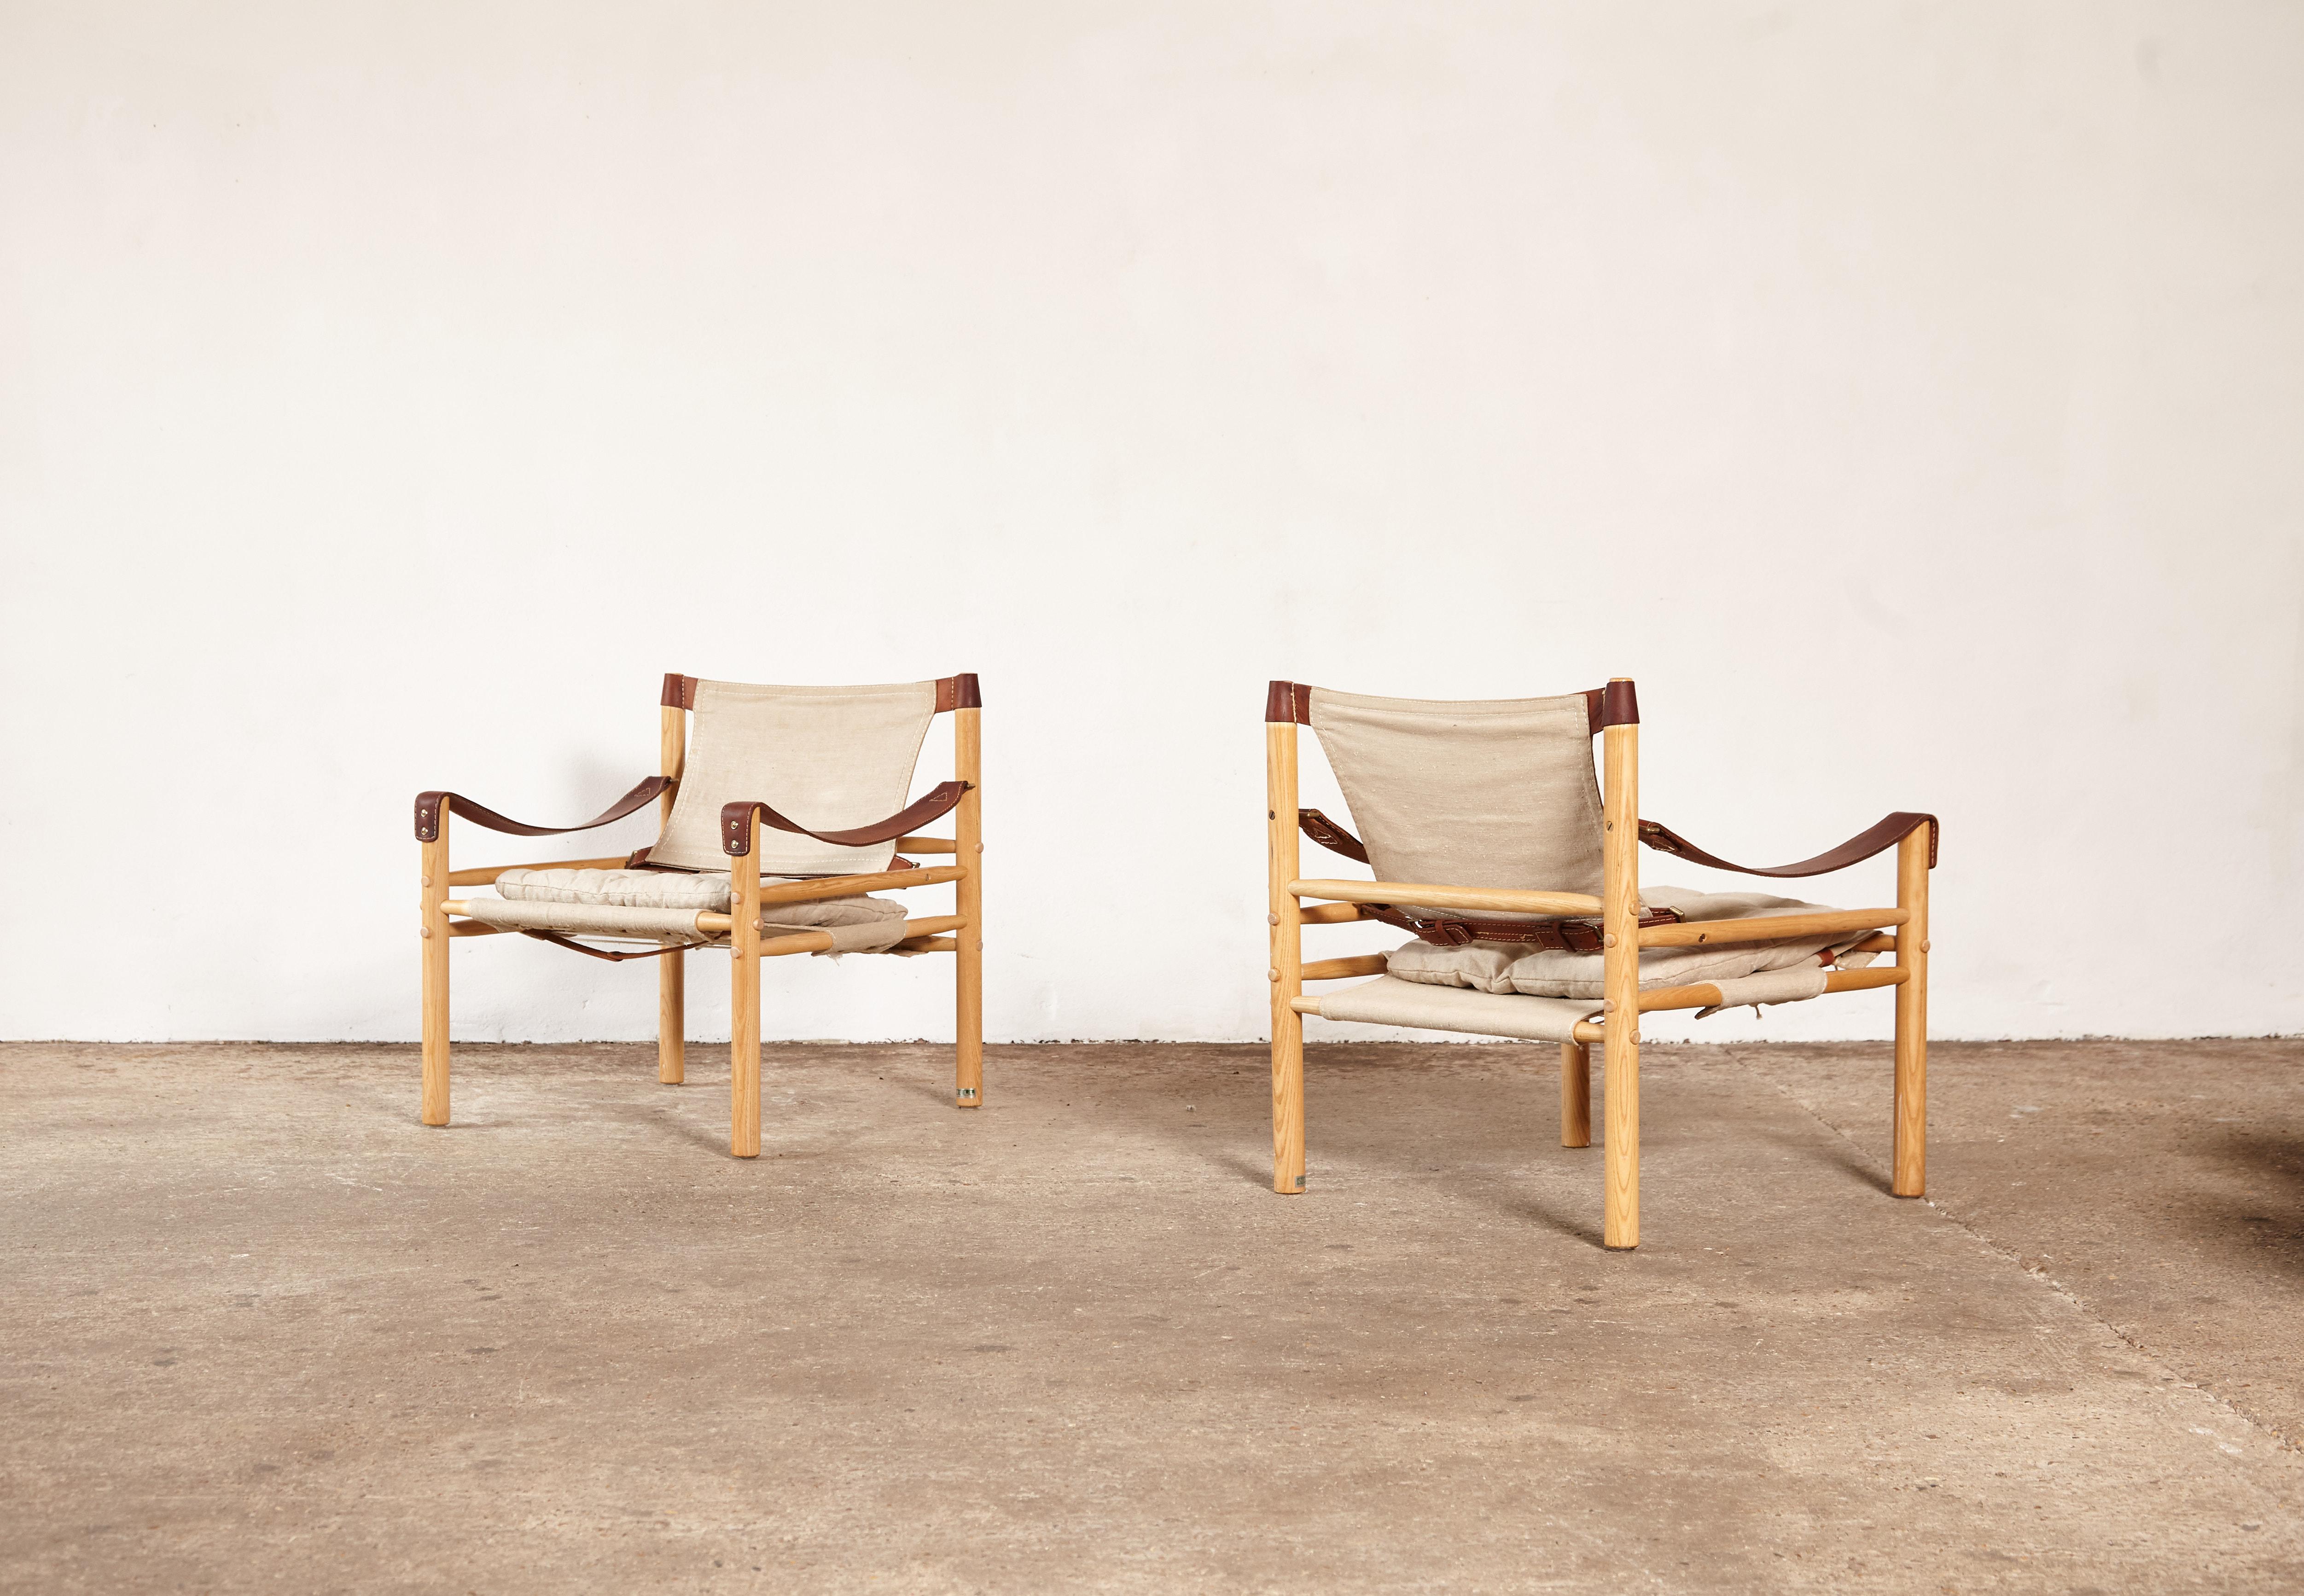 A lovely rare pair of Arne Norell safari sirocco chairs in ashwood and original canvas. Made by Norell Möbel AB, in Sweden. Very good original vintage condition with some minor signs of age related use and wear light marks to canvas. Fast and